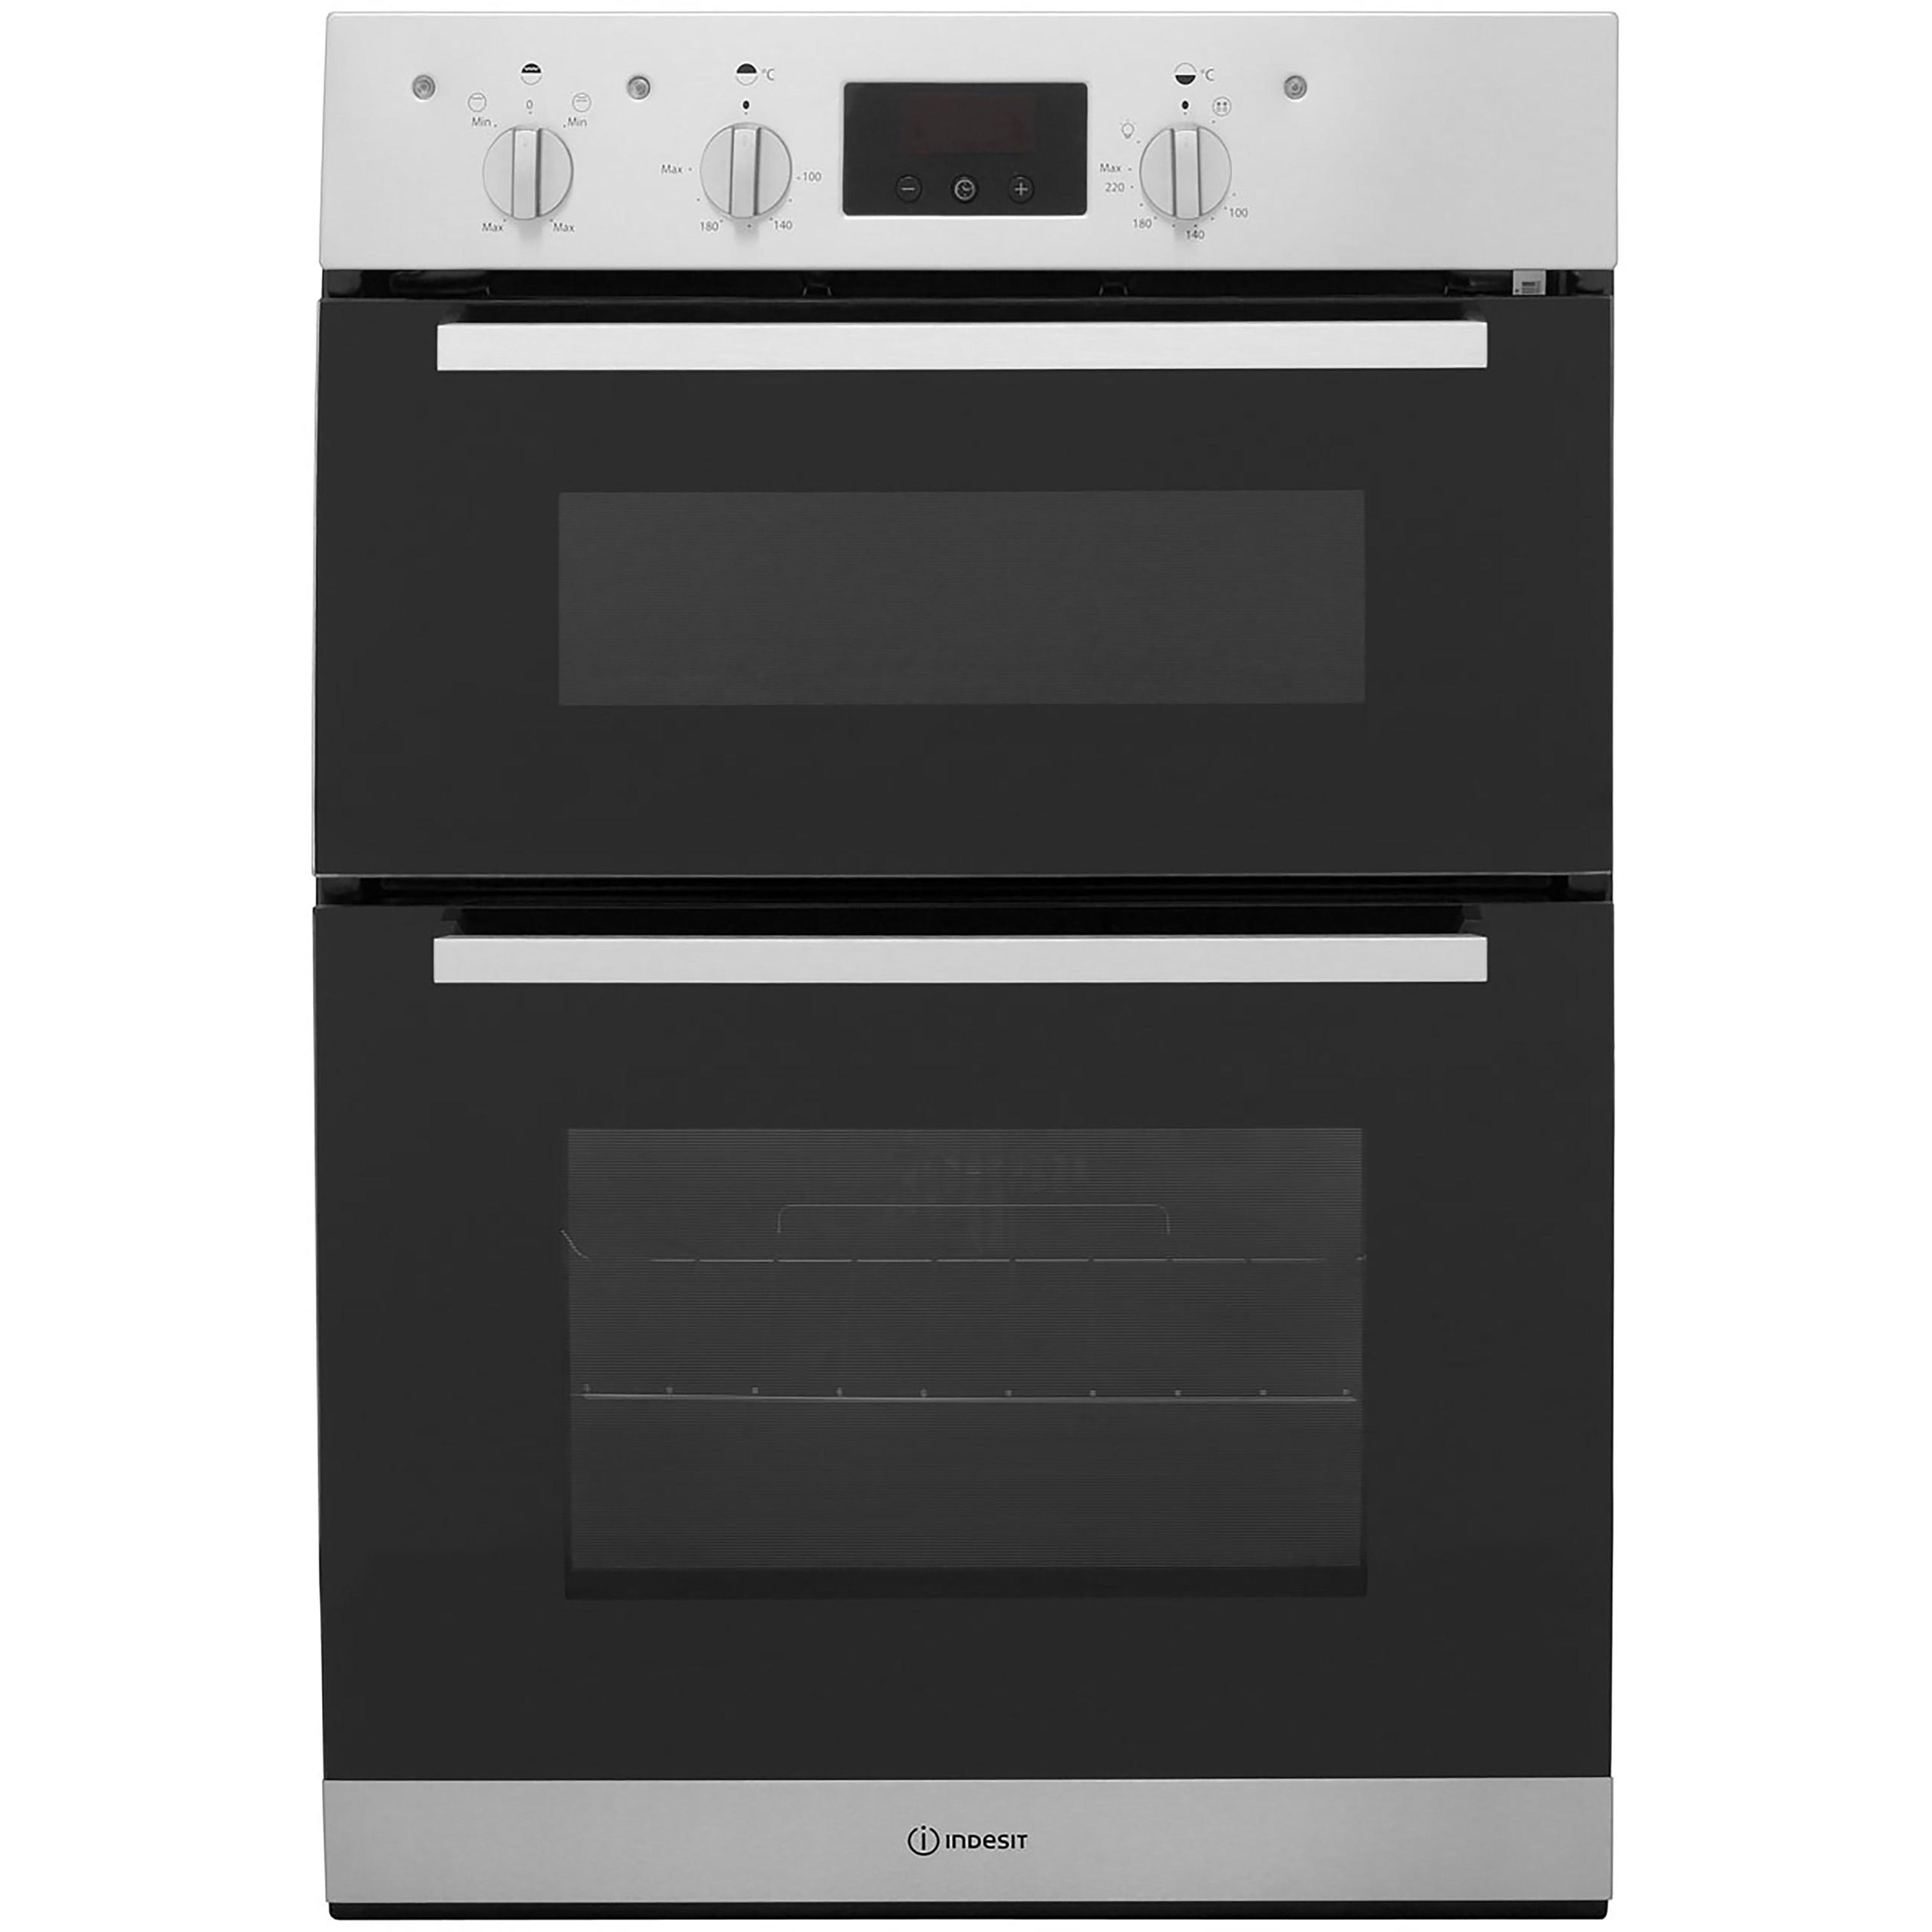 Indesit IDD6340IX_SS Built-in Electric Double oven - Stainless steel effect